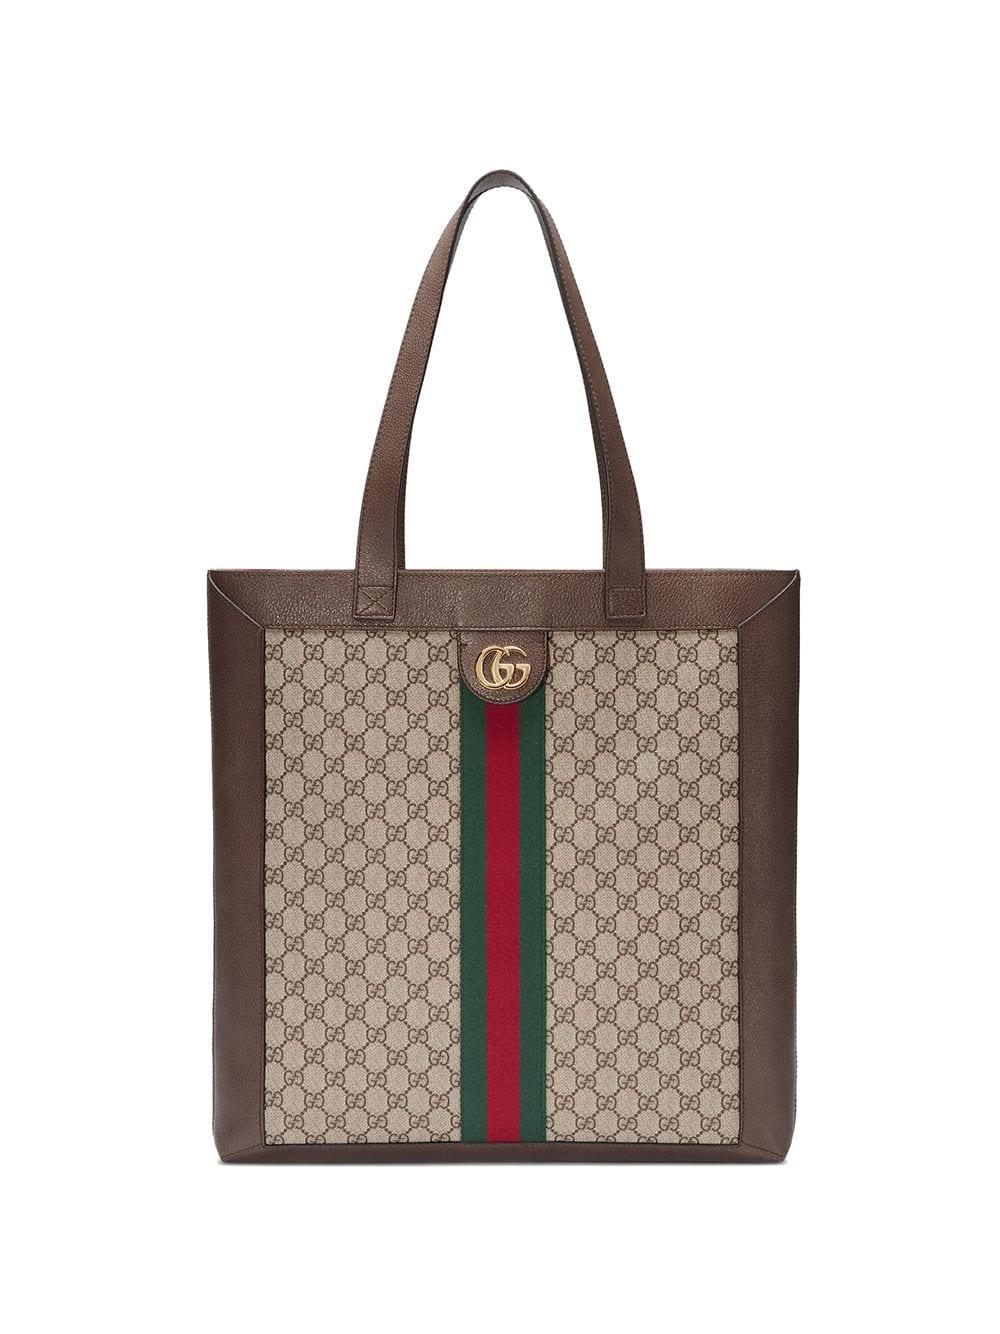 Gucci Ophidia Soft GG Supreme Large Tote in Brown | Lyst